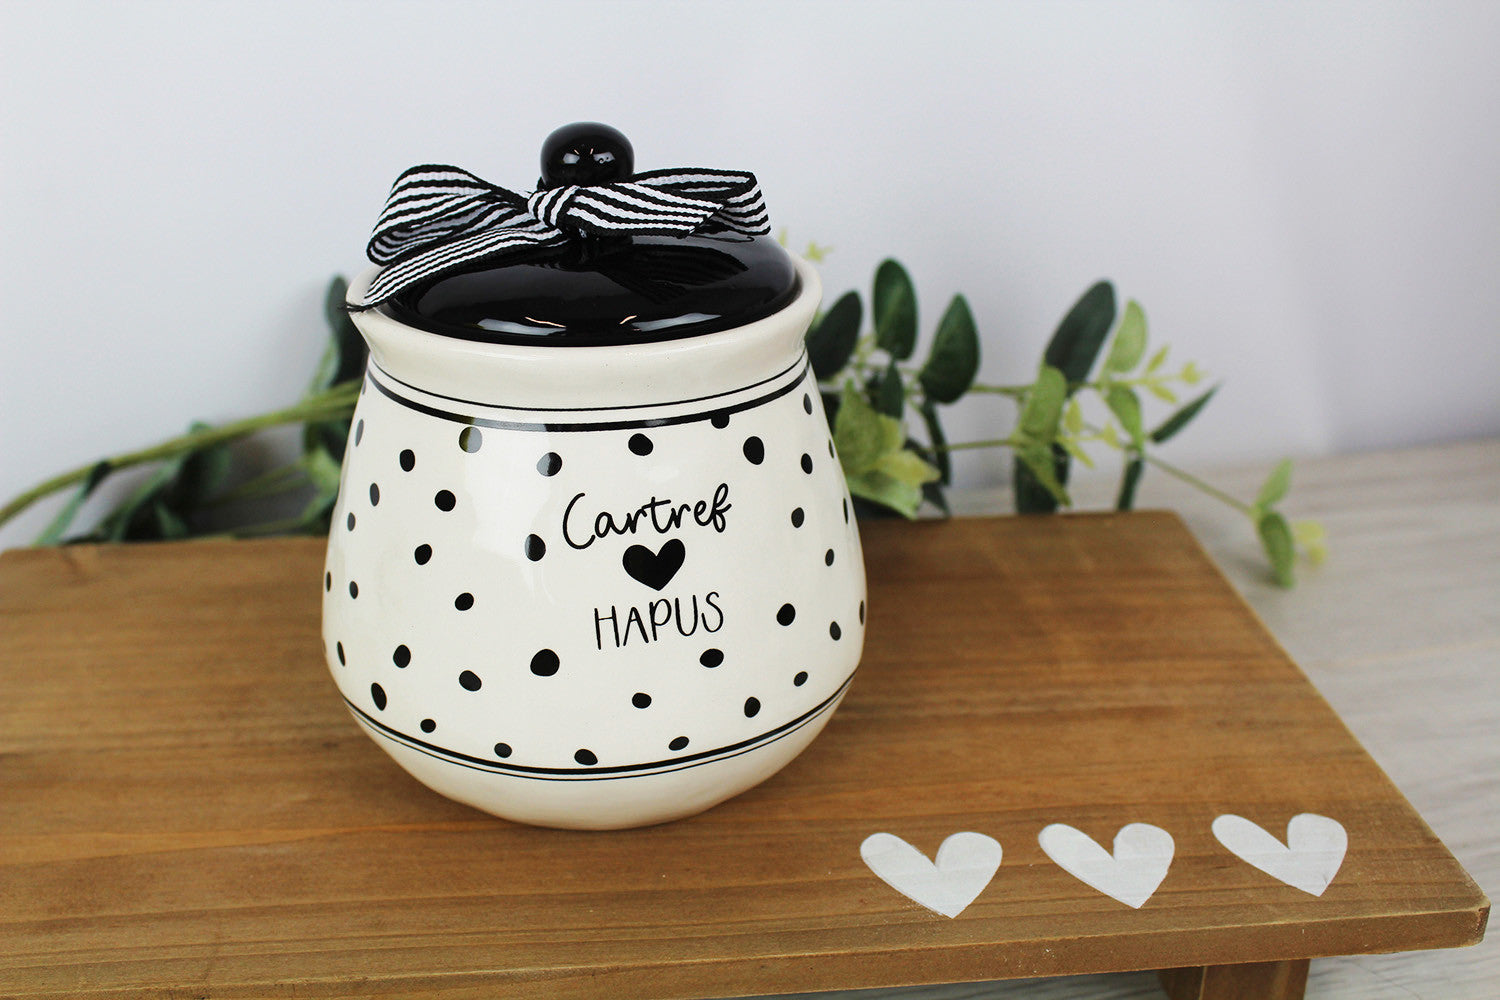 Catref Hapus Ceramic Storage Canister with Black Dot and Heart Detail - Kate's Cupboard